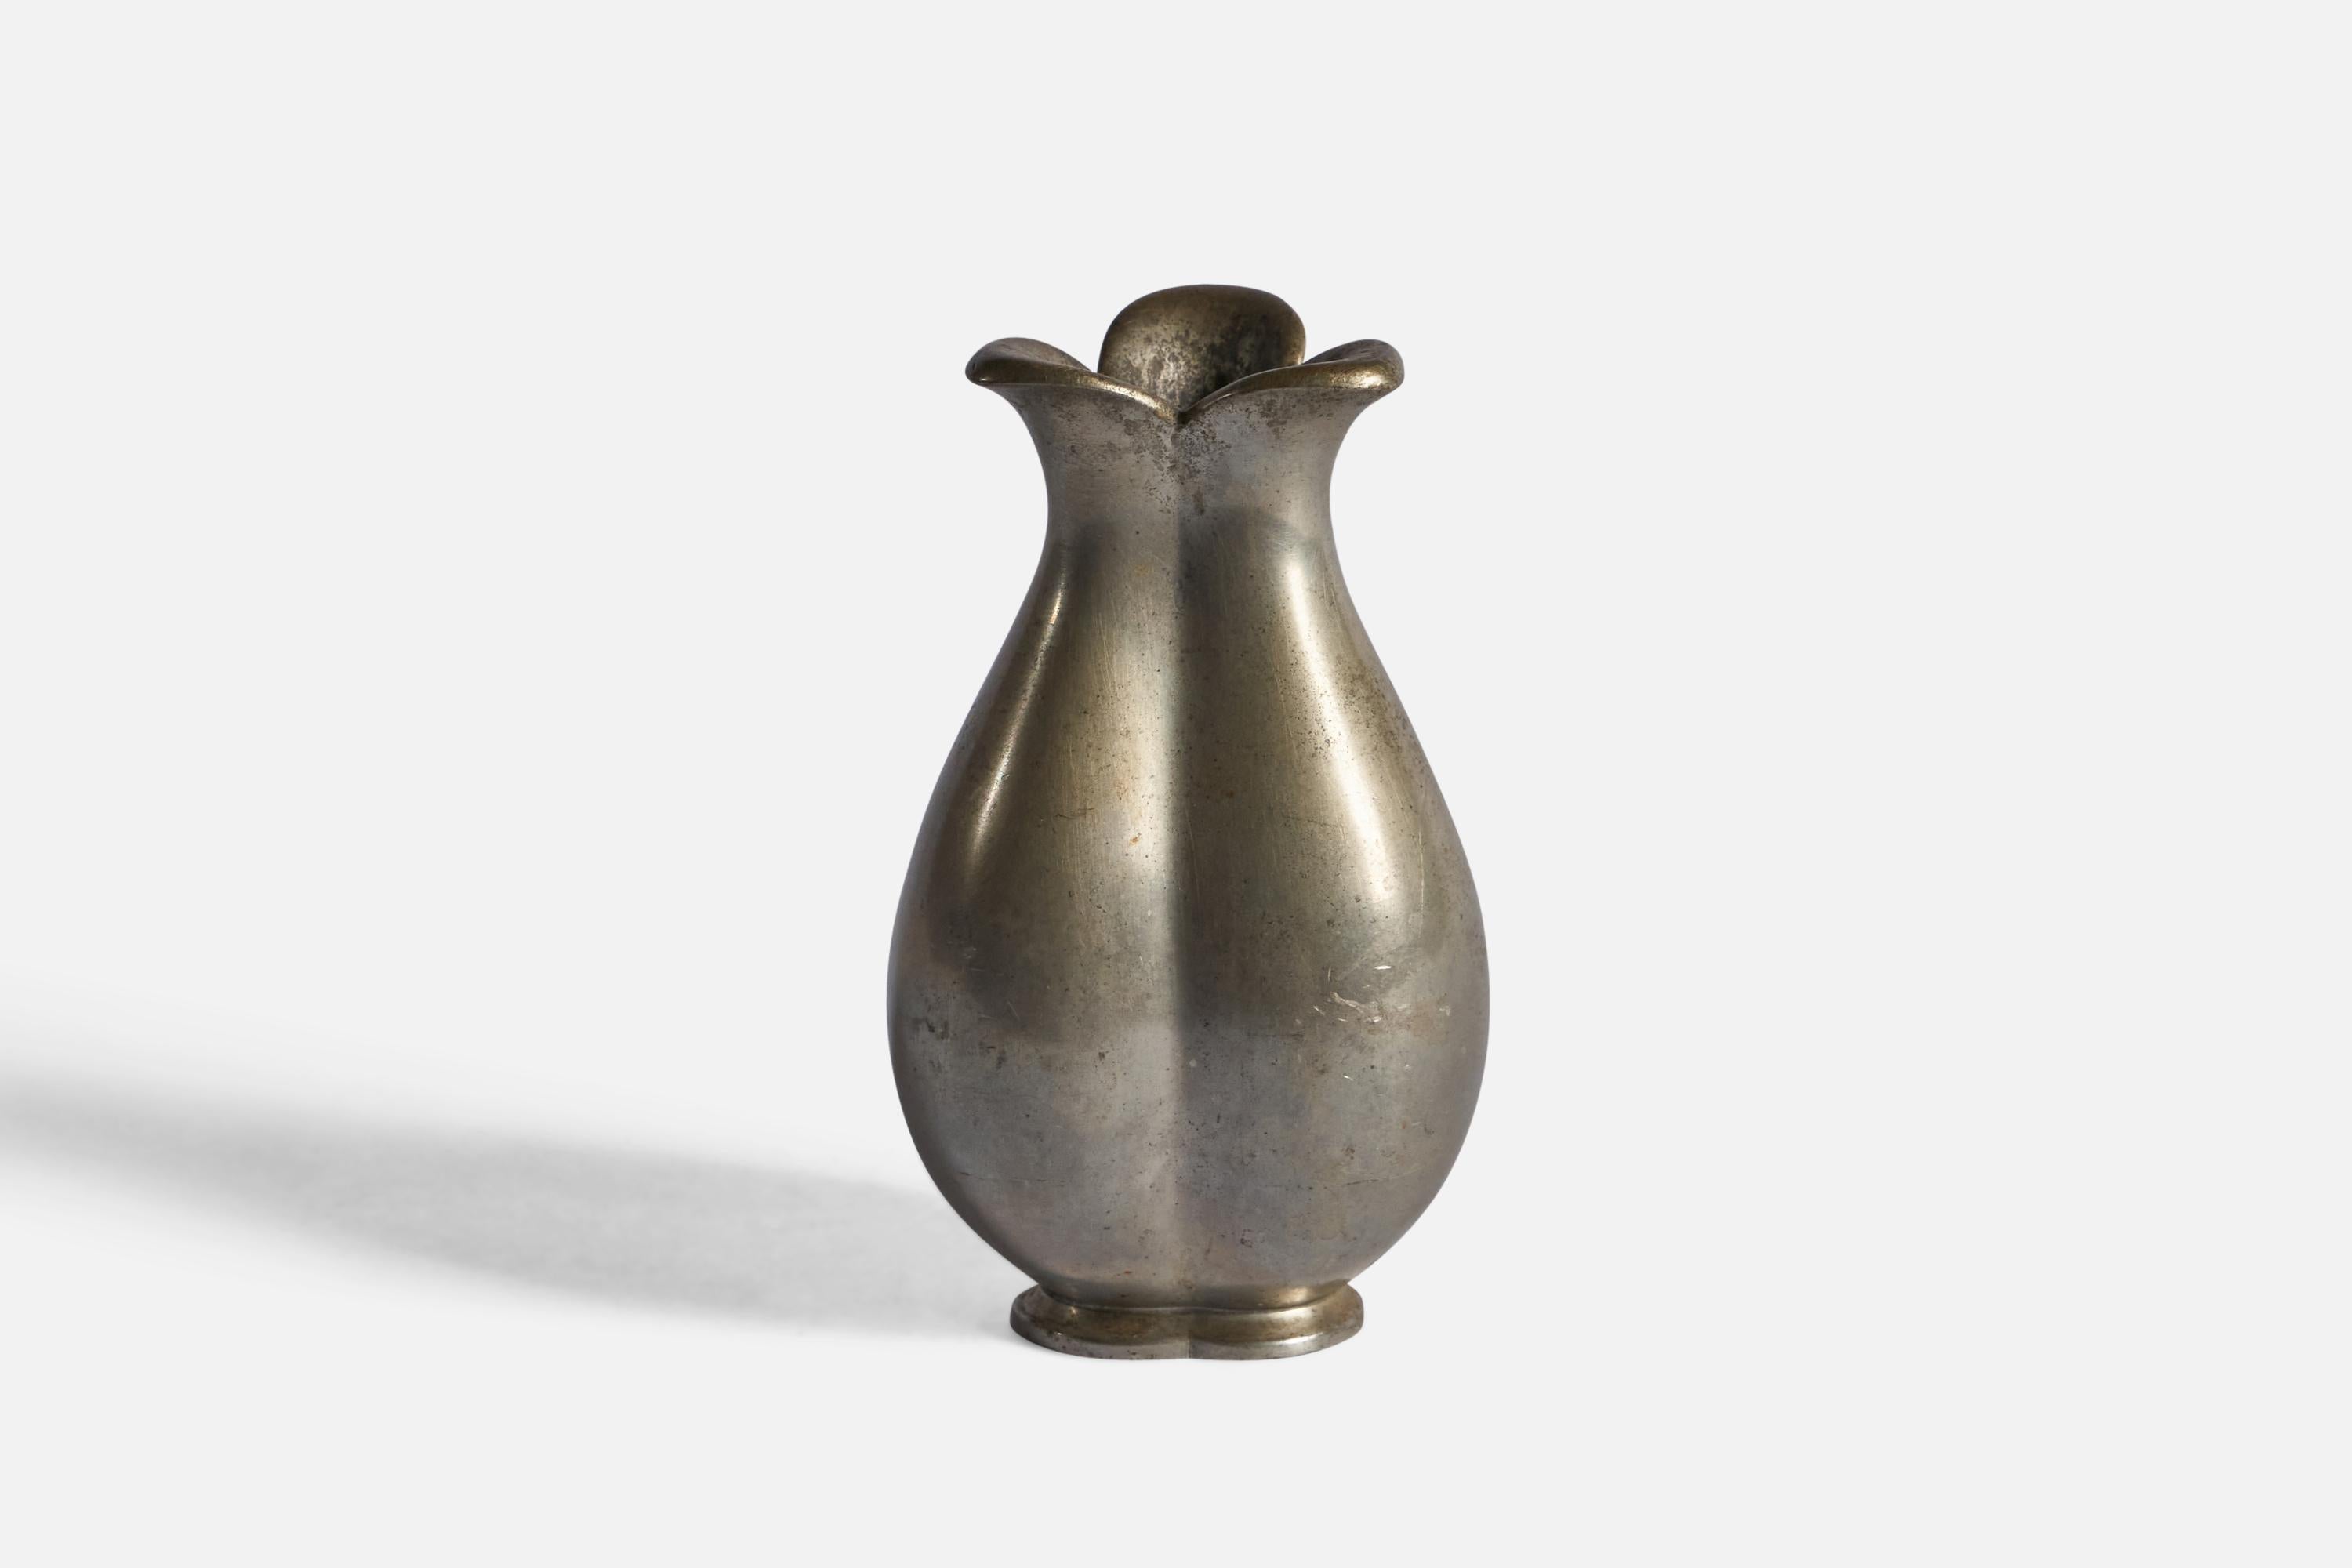 A pewter vase designed and produced by Just Andersen, Denmark, c. 1930s.